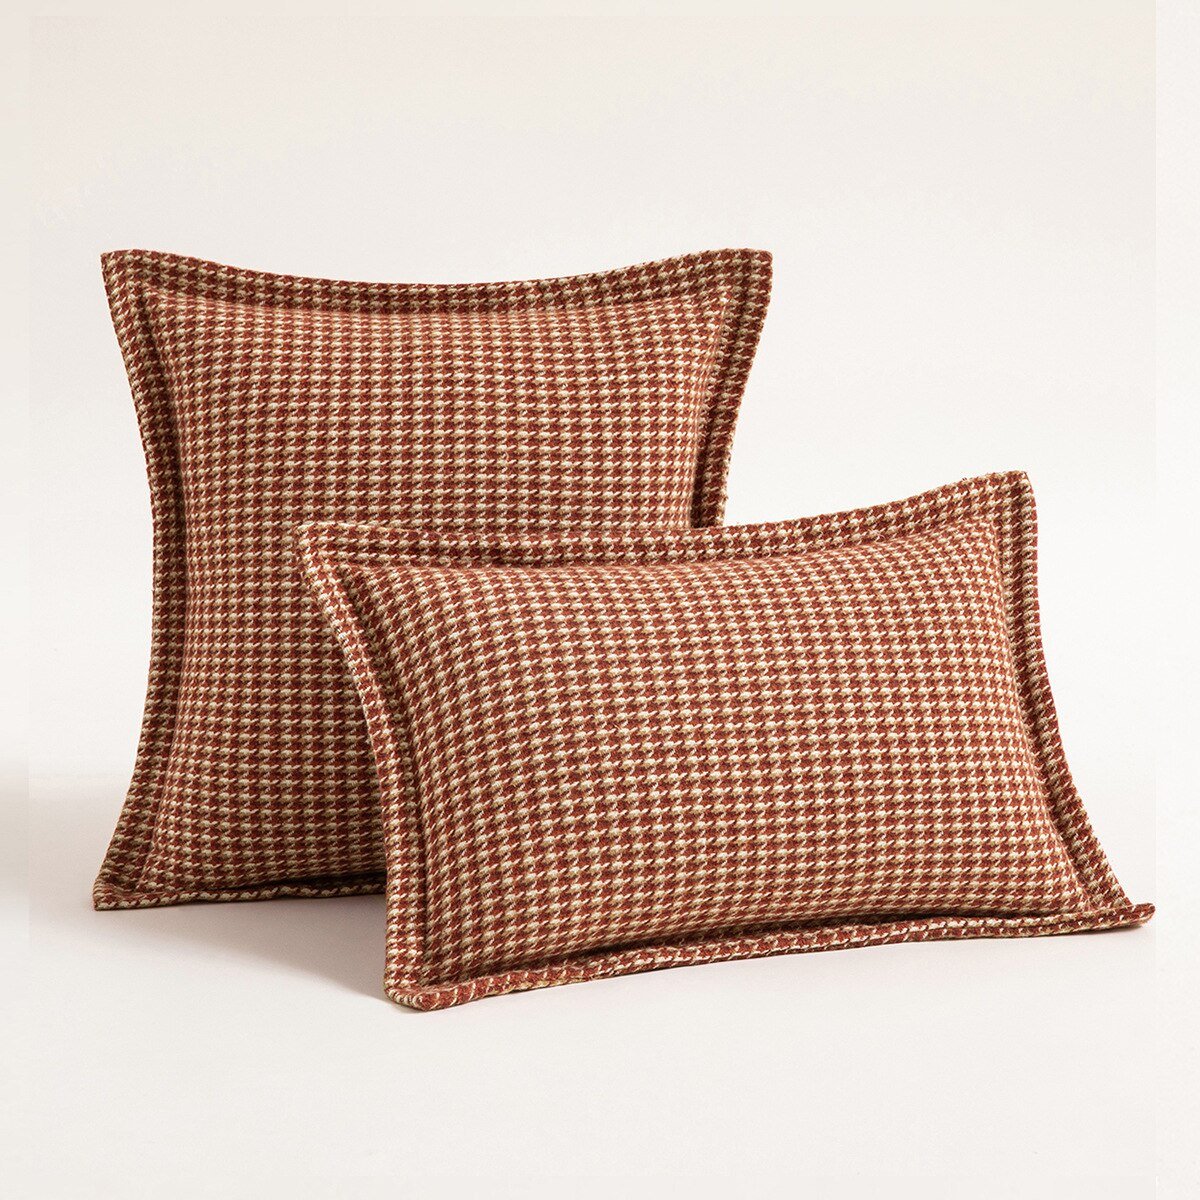 Valencia Cushion Cover - Red - Buy Cushion Cover Online at FRANKY'S